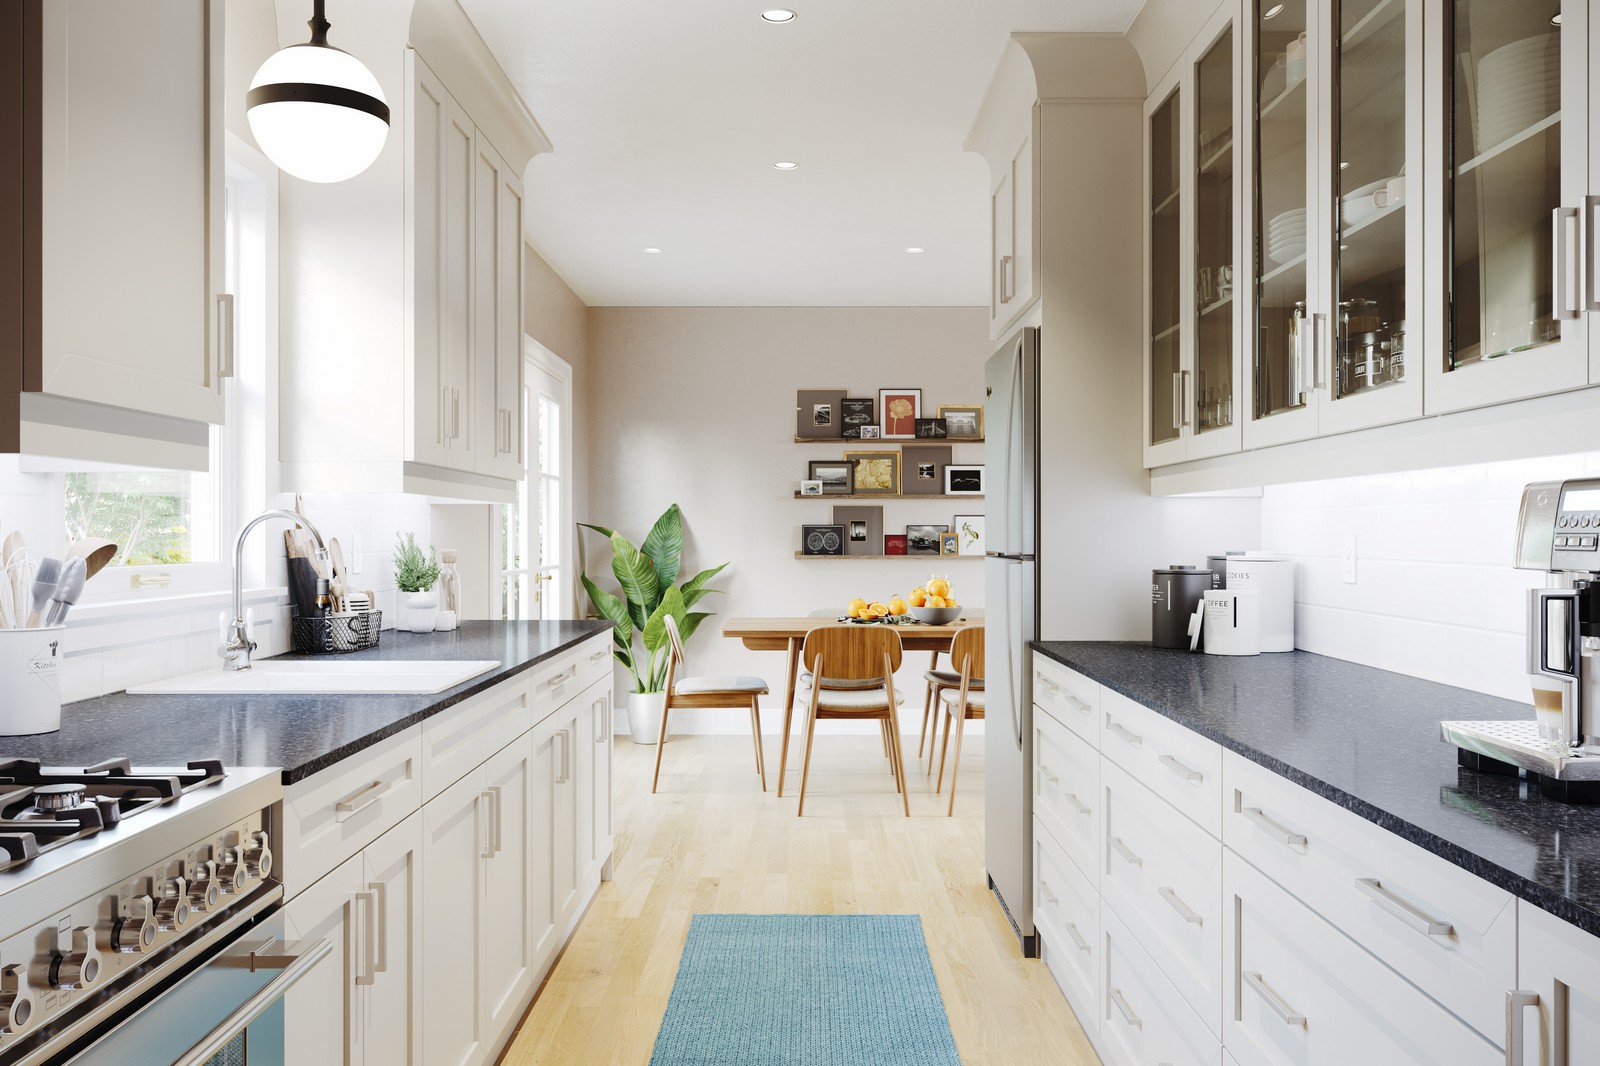 Kitchen beauty shots showcasing the cabinetry style - , 7